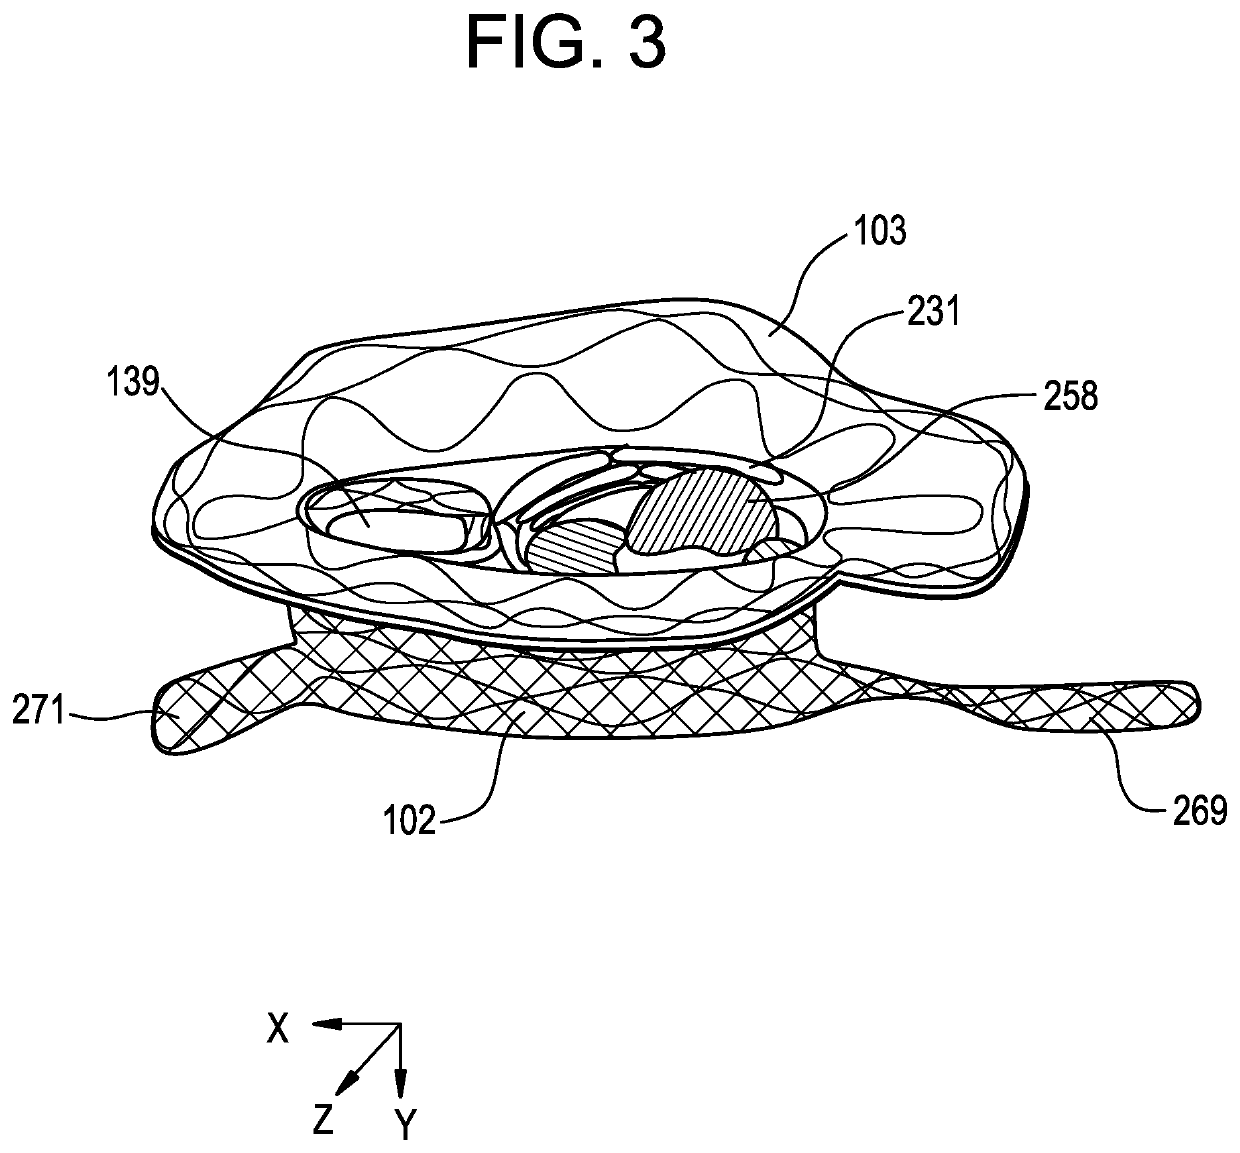 Collapsible Inner Flow Control Component for Side-Delivered Transcatheter Heart Valve Prosthesis